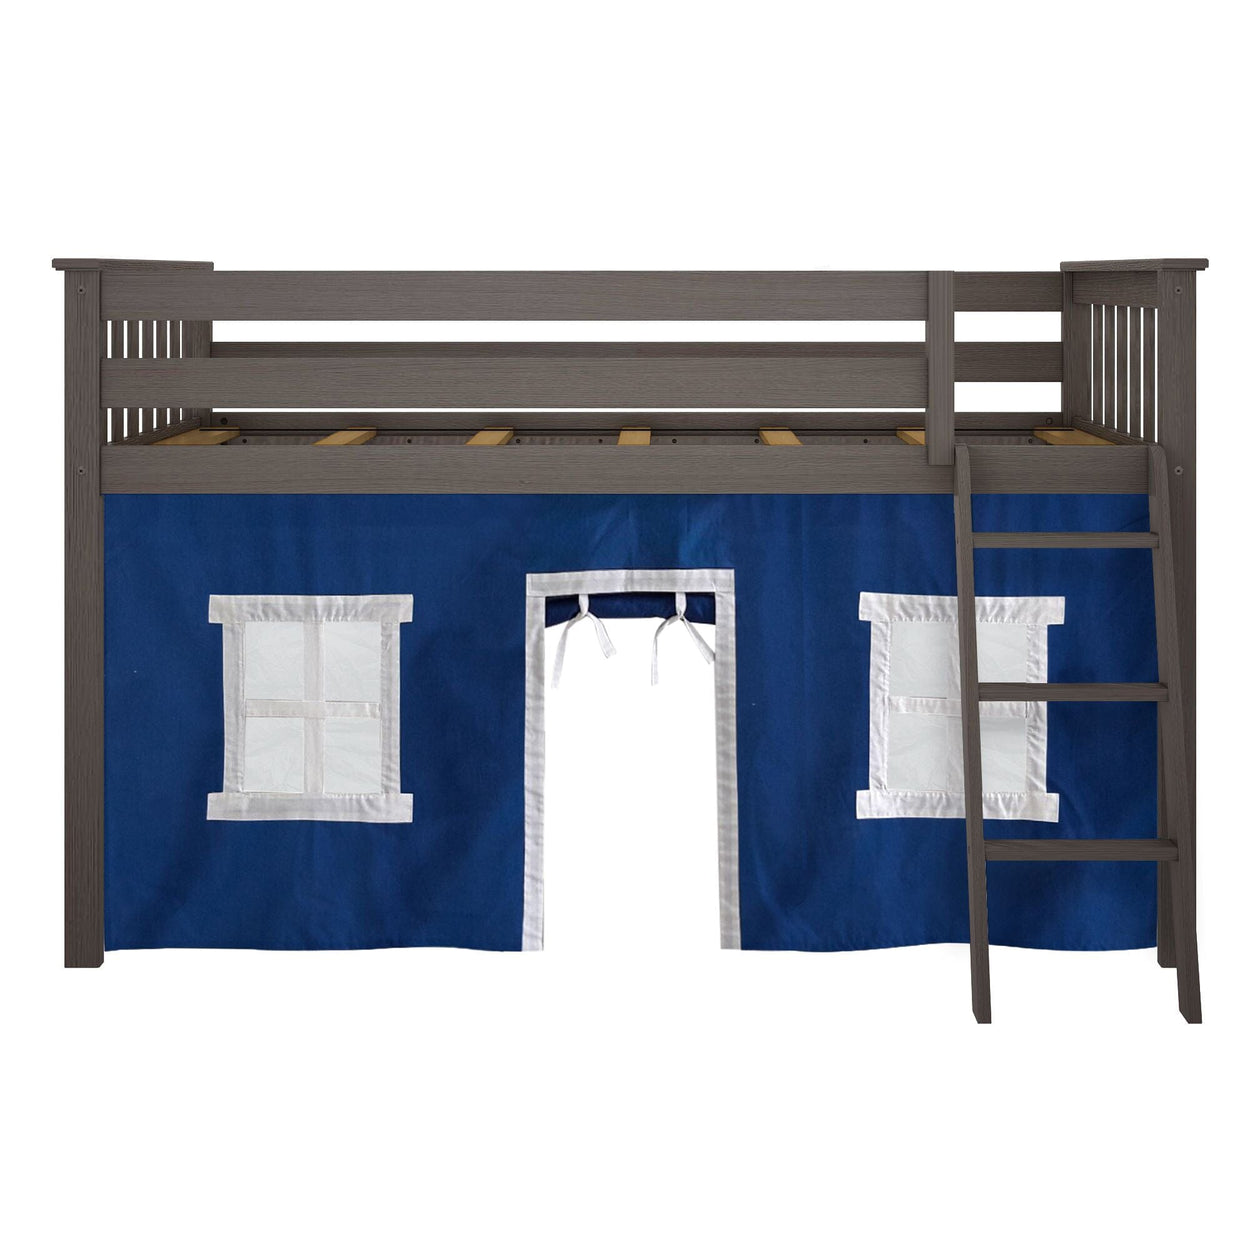 180212151022 : Loft Beds Twin-Size Low Loft With Curtain, Clay + Blue